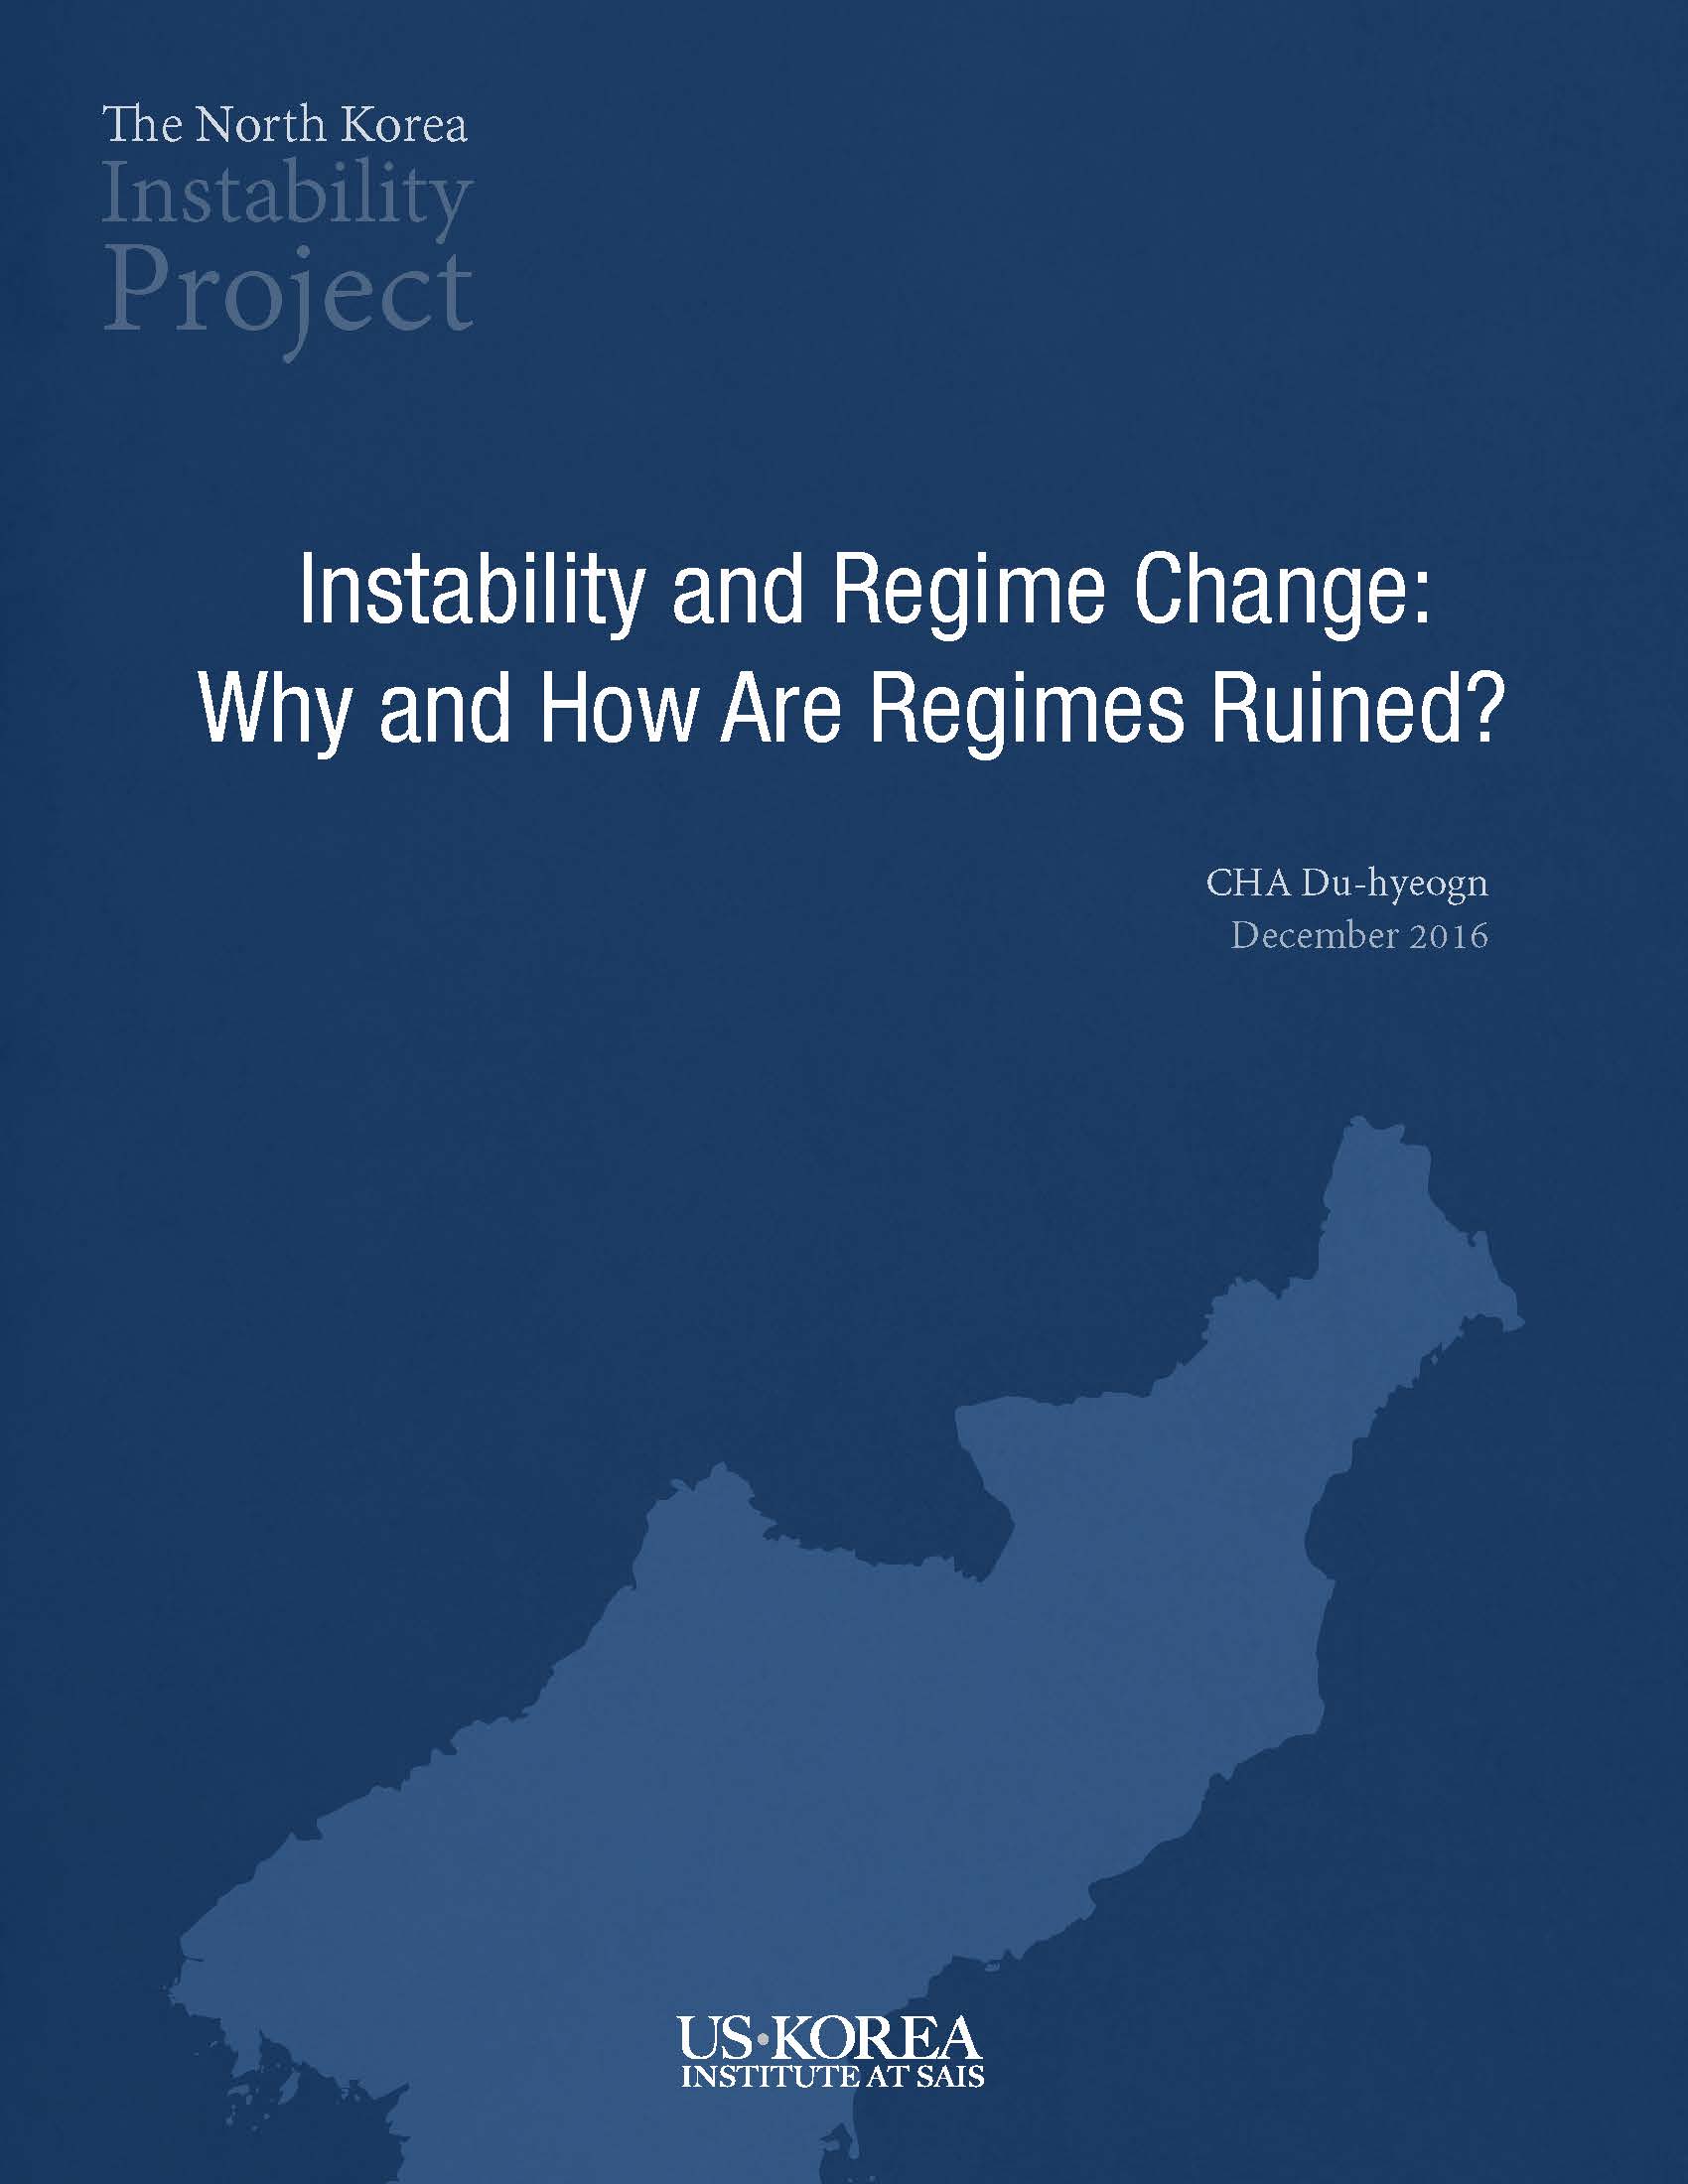 Instability and Regime Change: Why and How Are Regimes Ruined?